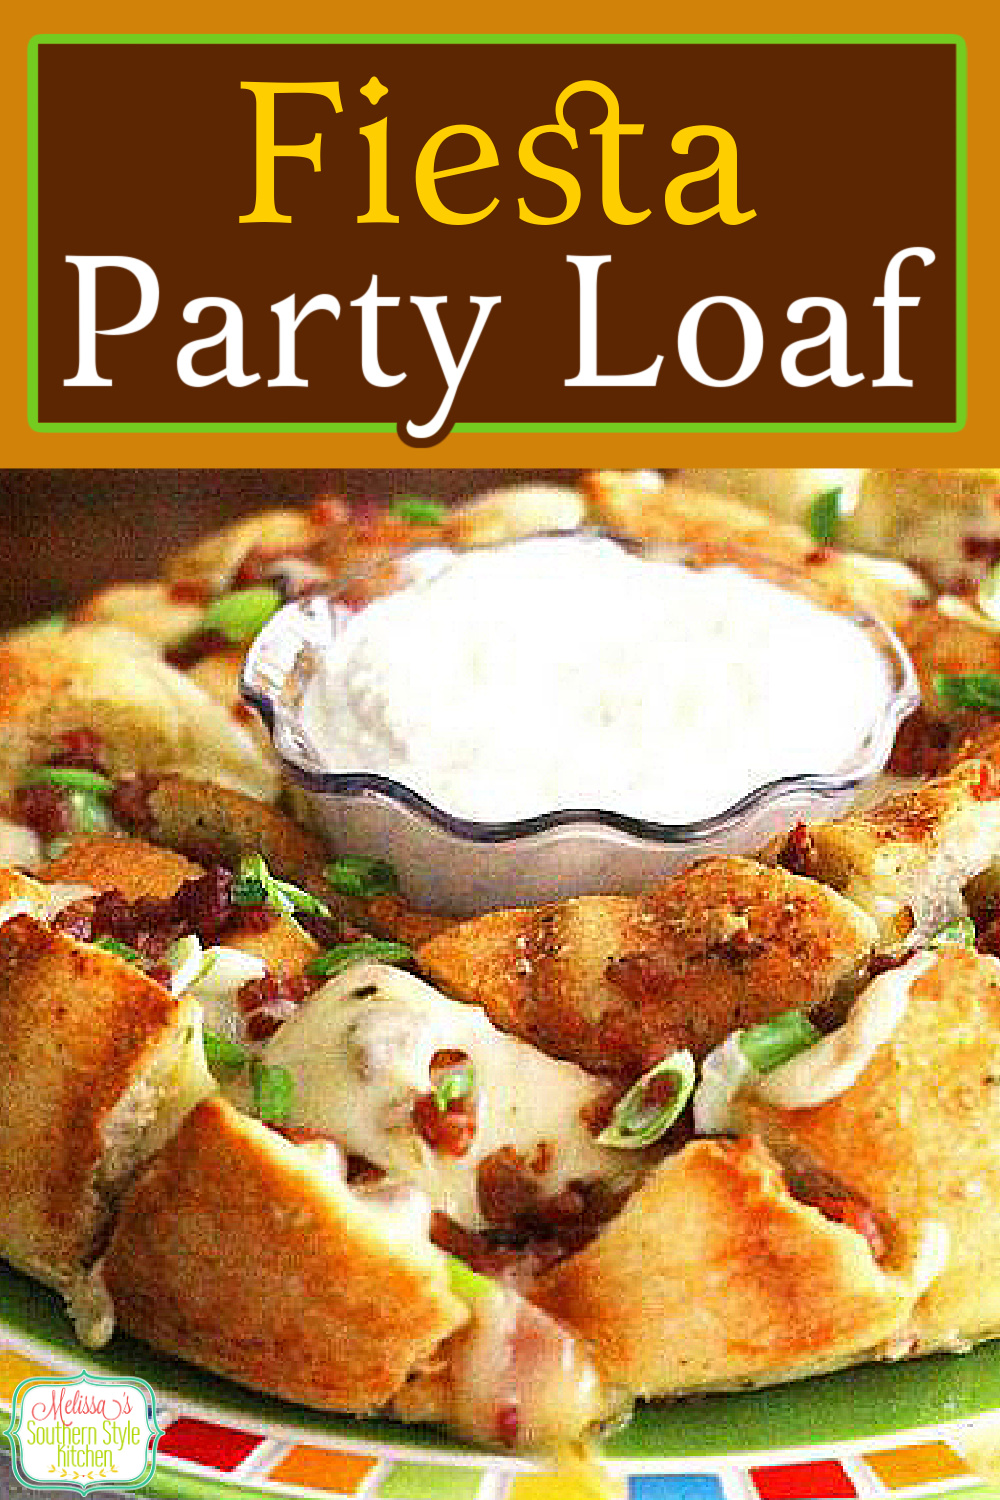 Get the party started with this cheesy perfectly seasoned pull apart Fiesta Party Loaf bread #fiestalolaf #breadrecipes #bacon #bread #fiesta #partyfood #pullapartbread #appetizers #sidedishrecipes #dinnerideas #dinner #breadrecipes #tailgaiting #southernfood #southernrecipes via @melissasssk